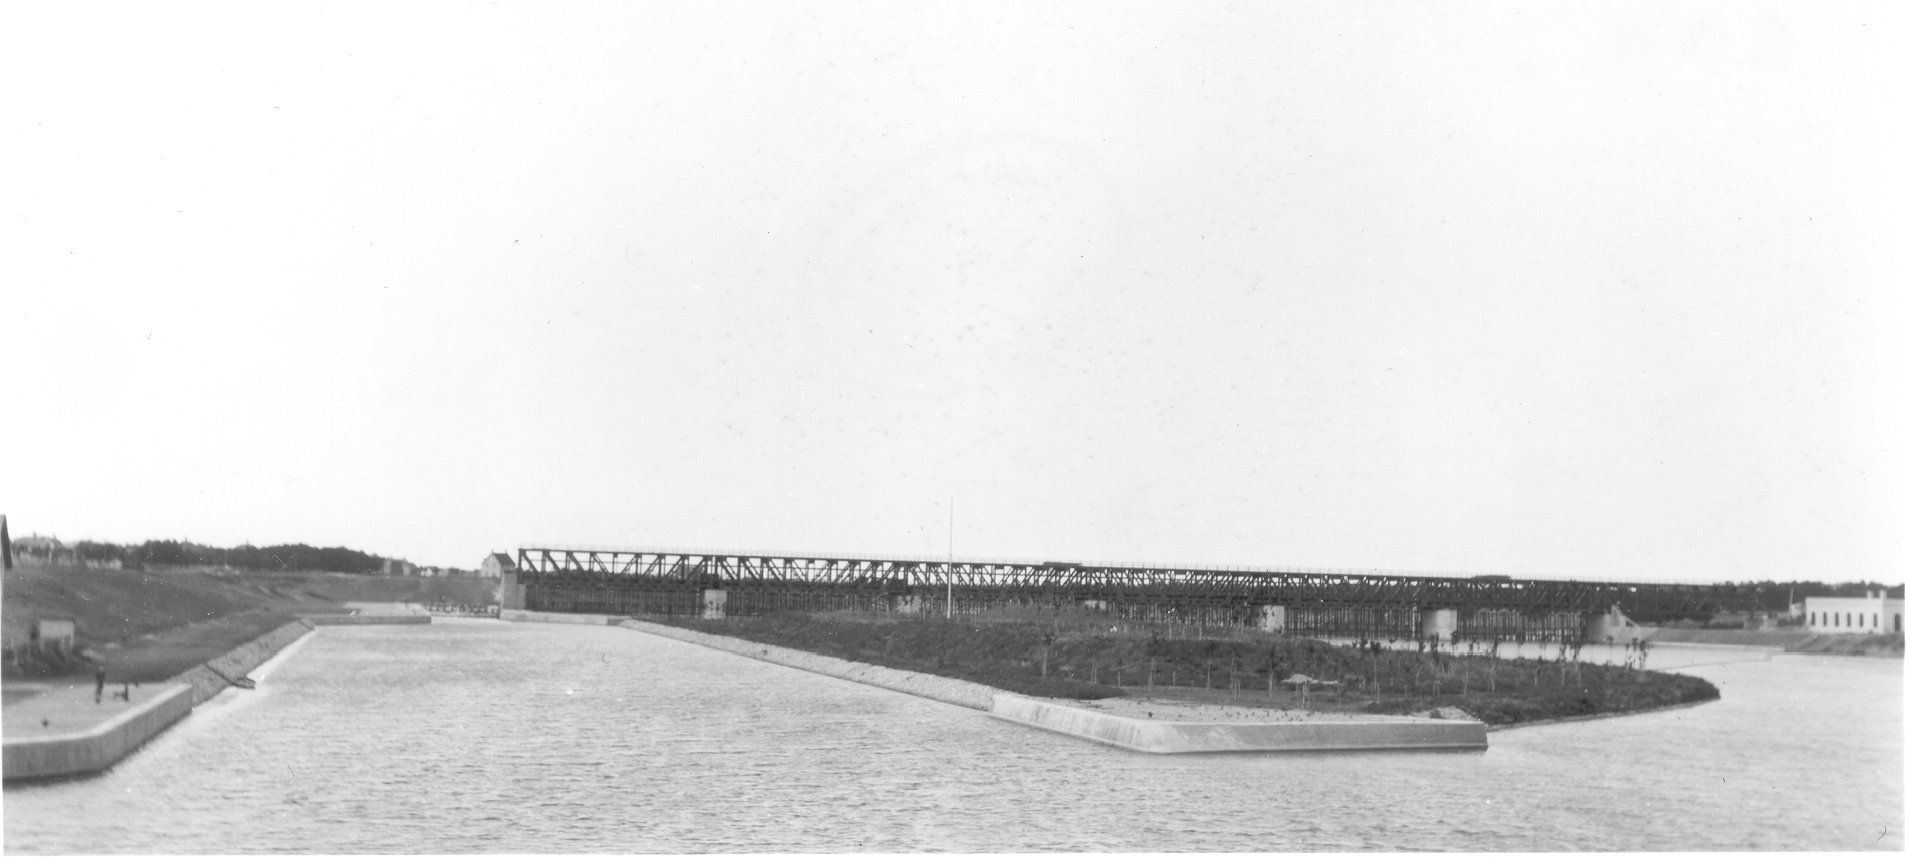 1910 Looking North to Lockport